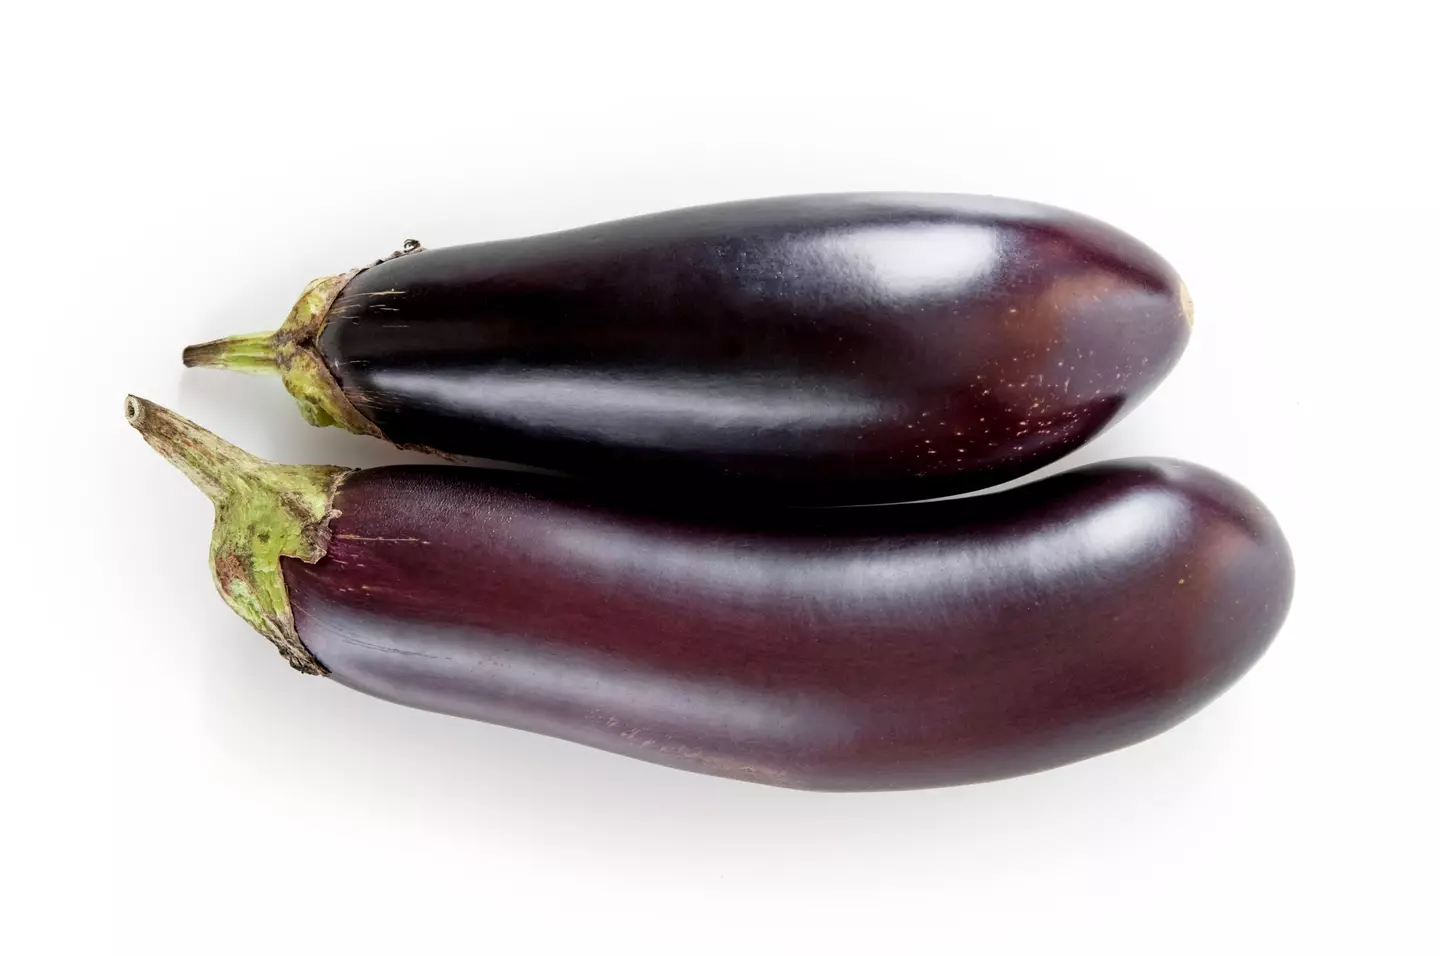 The man suffered from an 'eggplant deformity' after breaking his penis, so the whole thing looked like one of these.